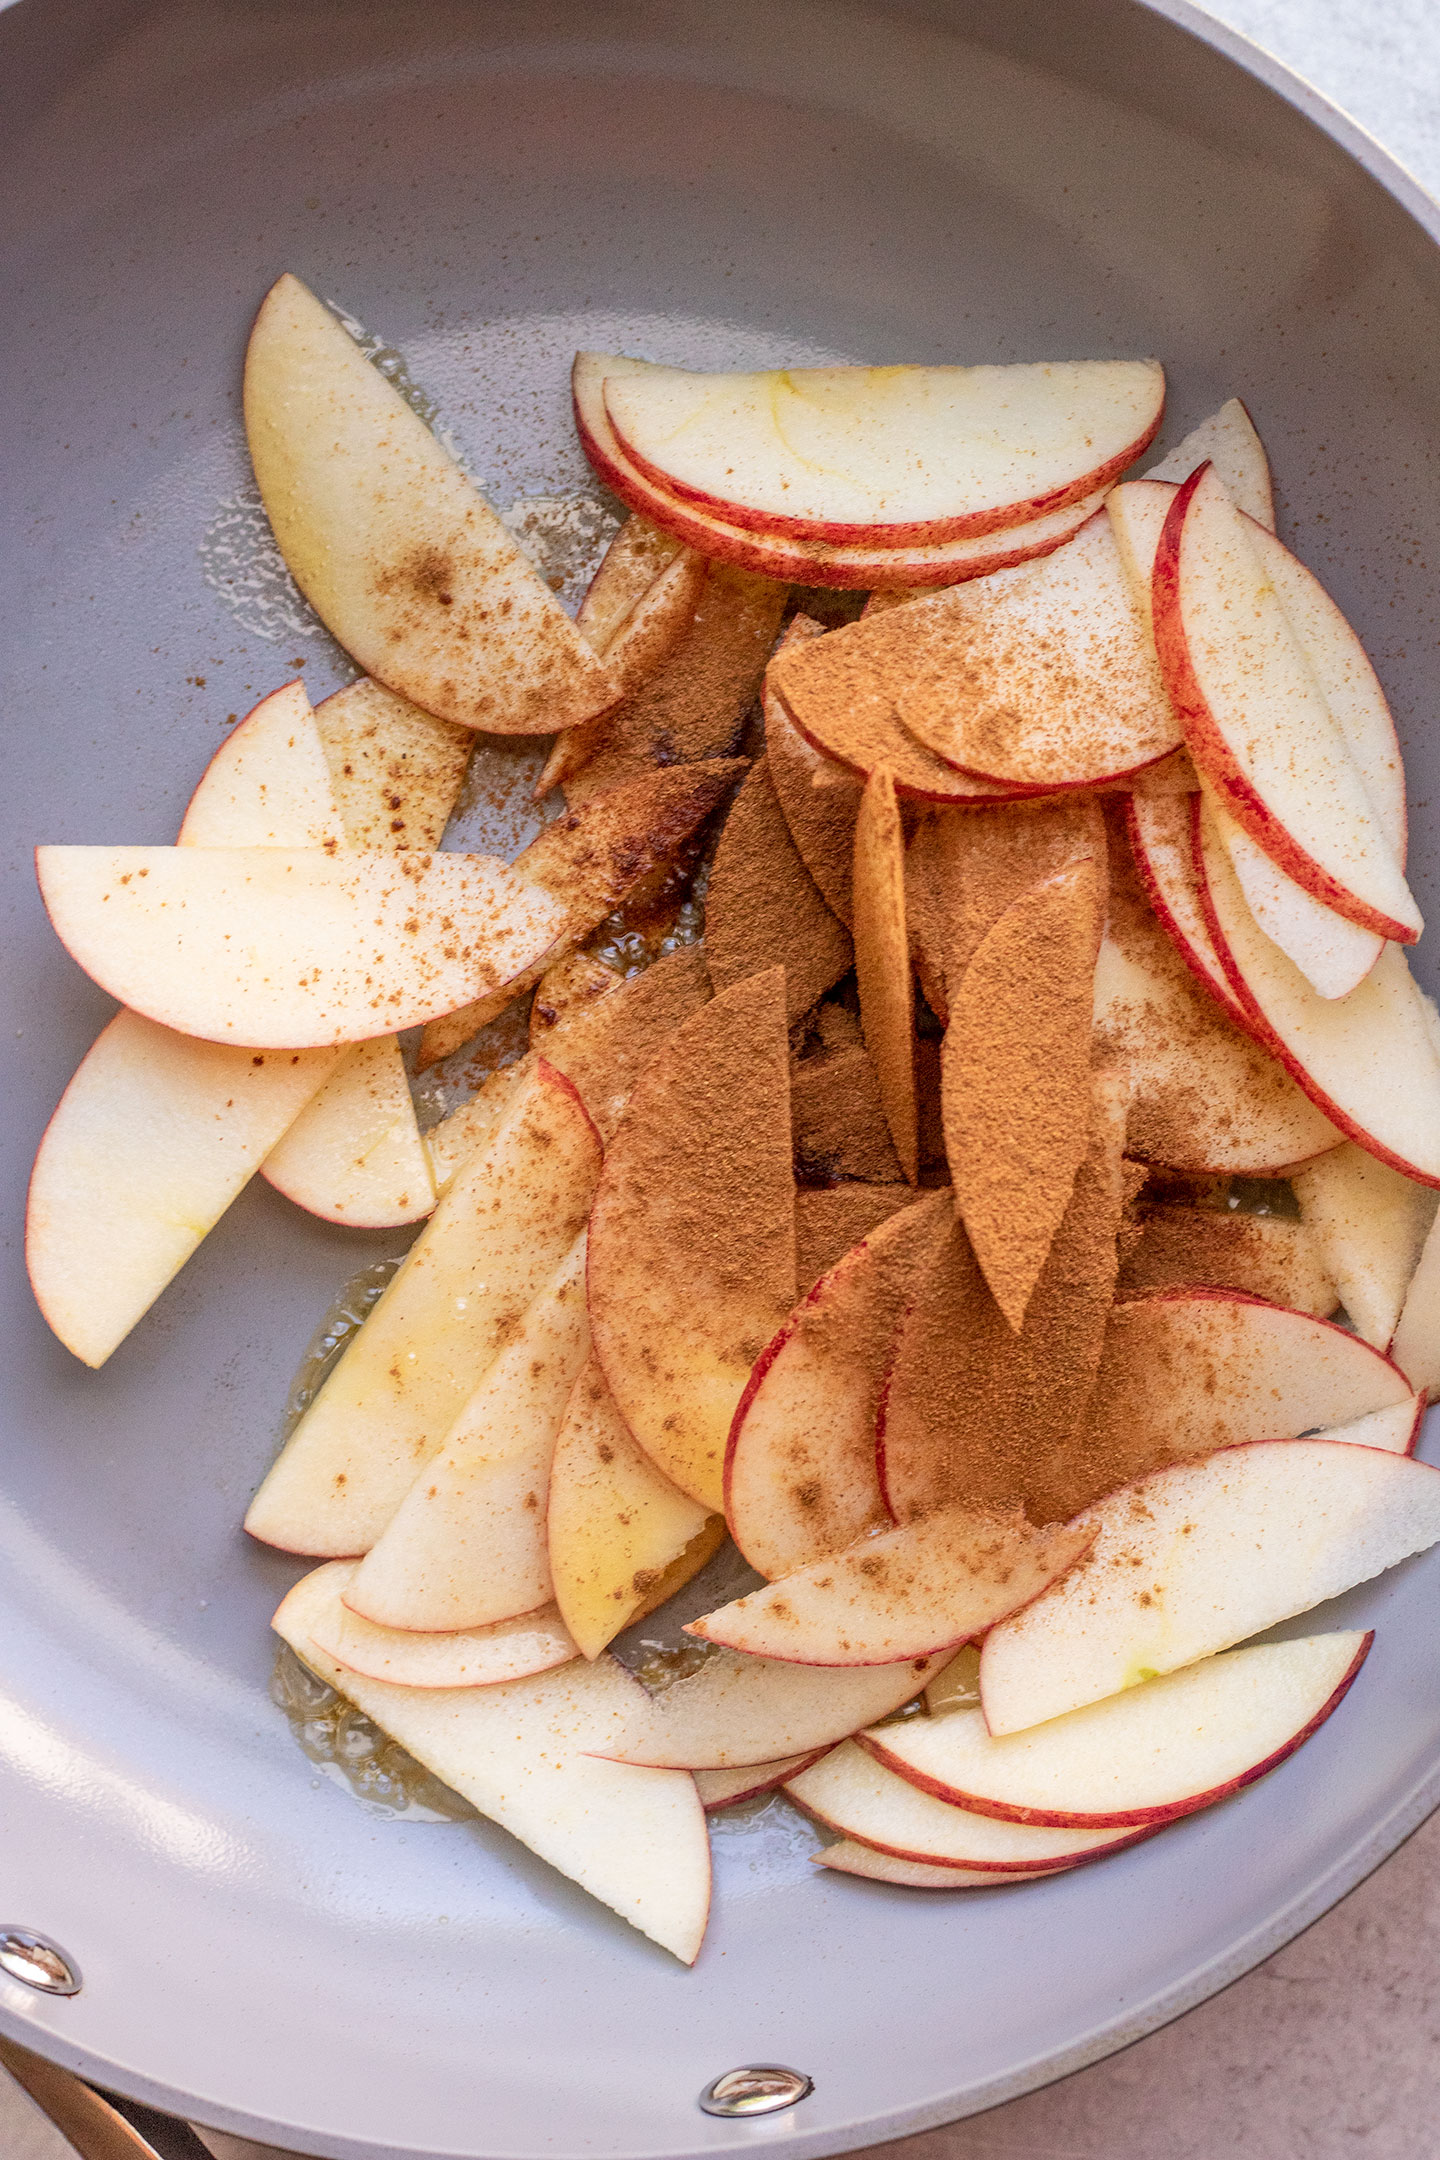 Apple slices added to a pan with cinnamon and maple syrup.